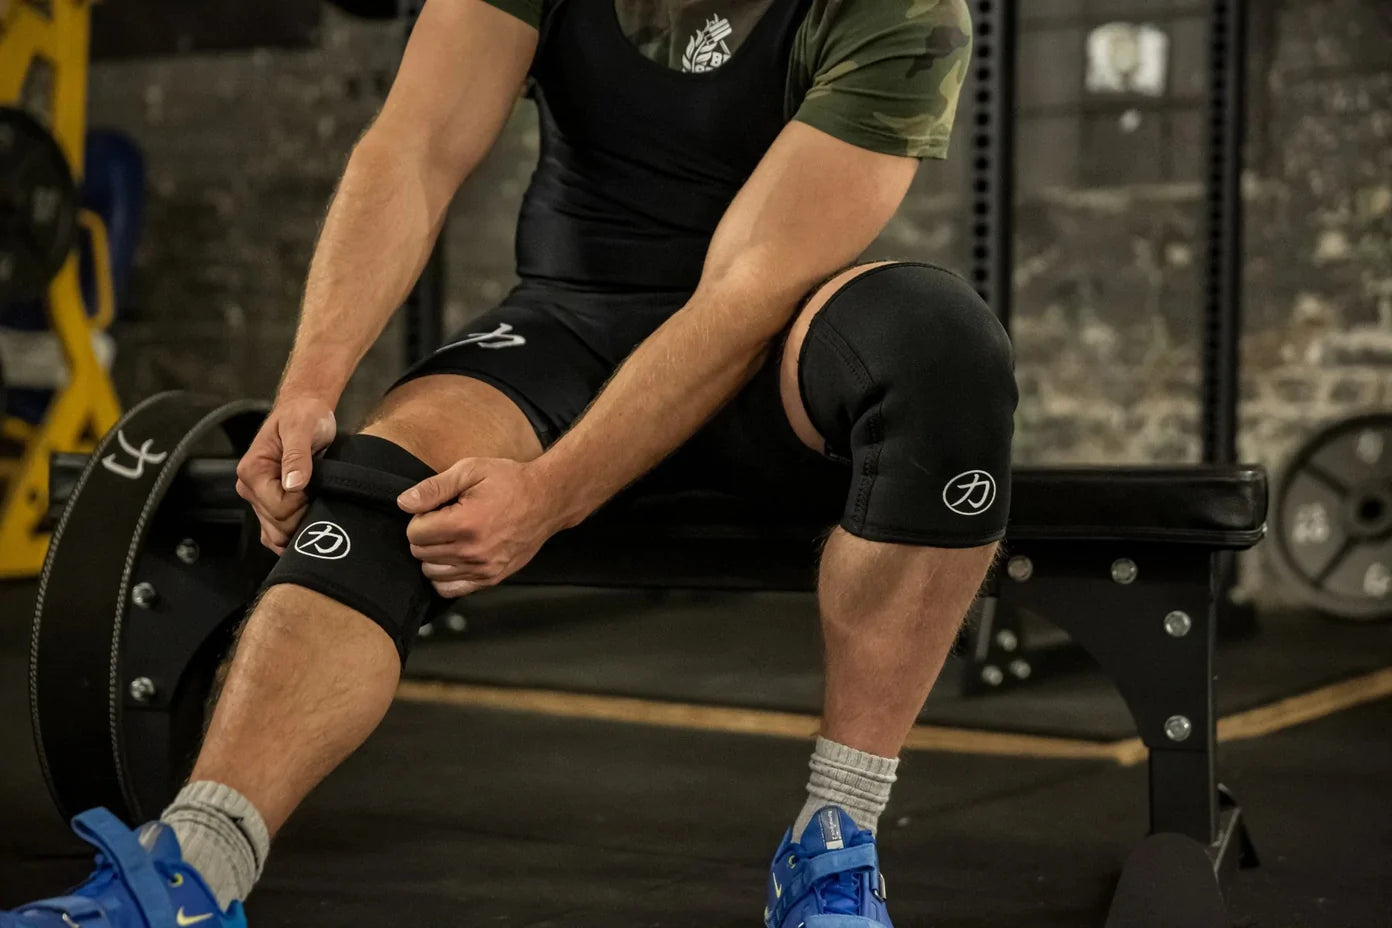 What are the best knee sleeves for squats?